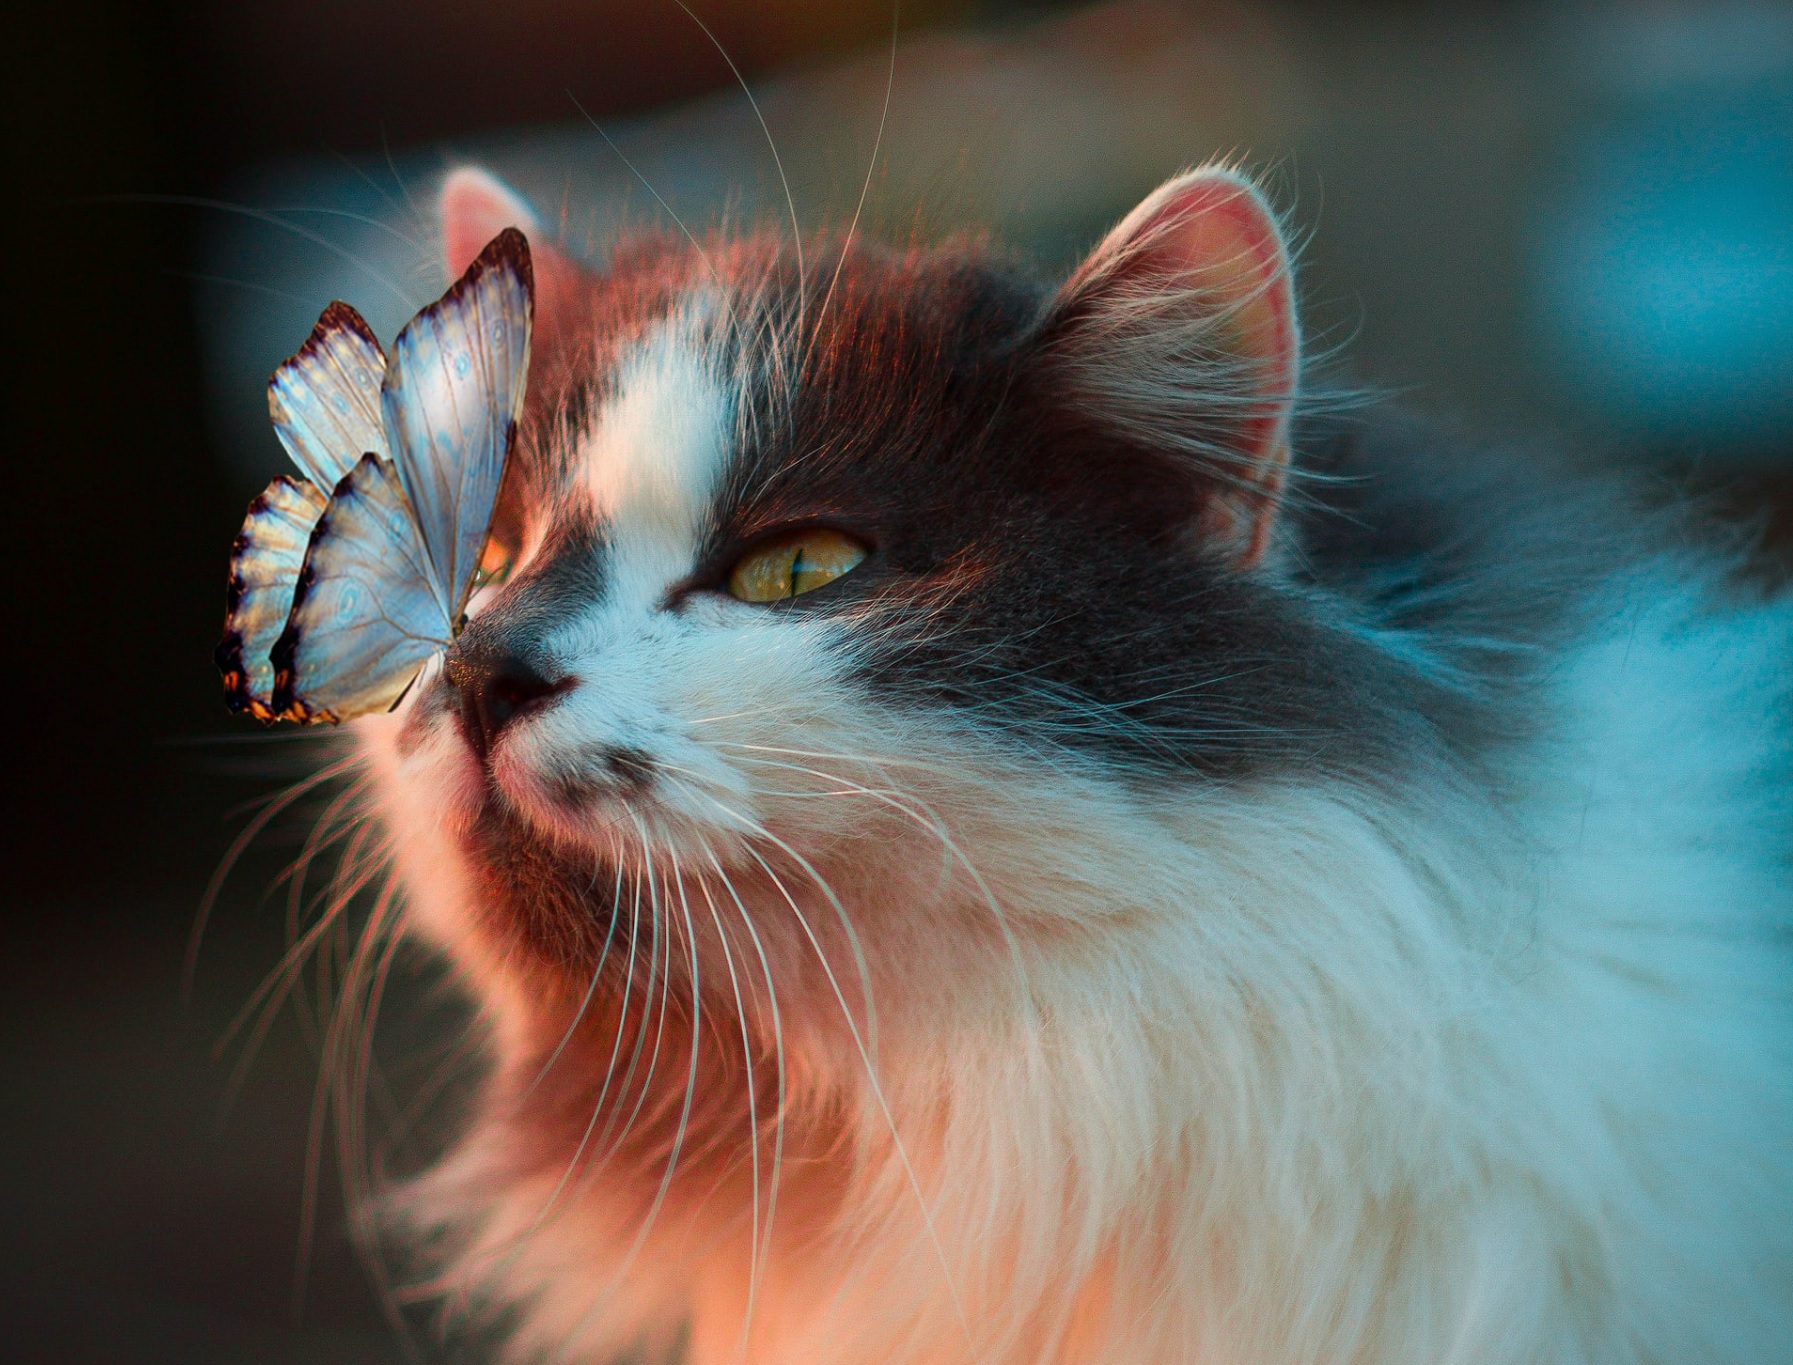 white butterfly resting on cat's nose